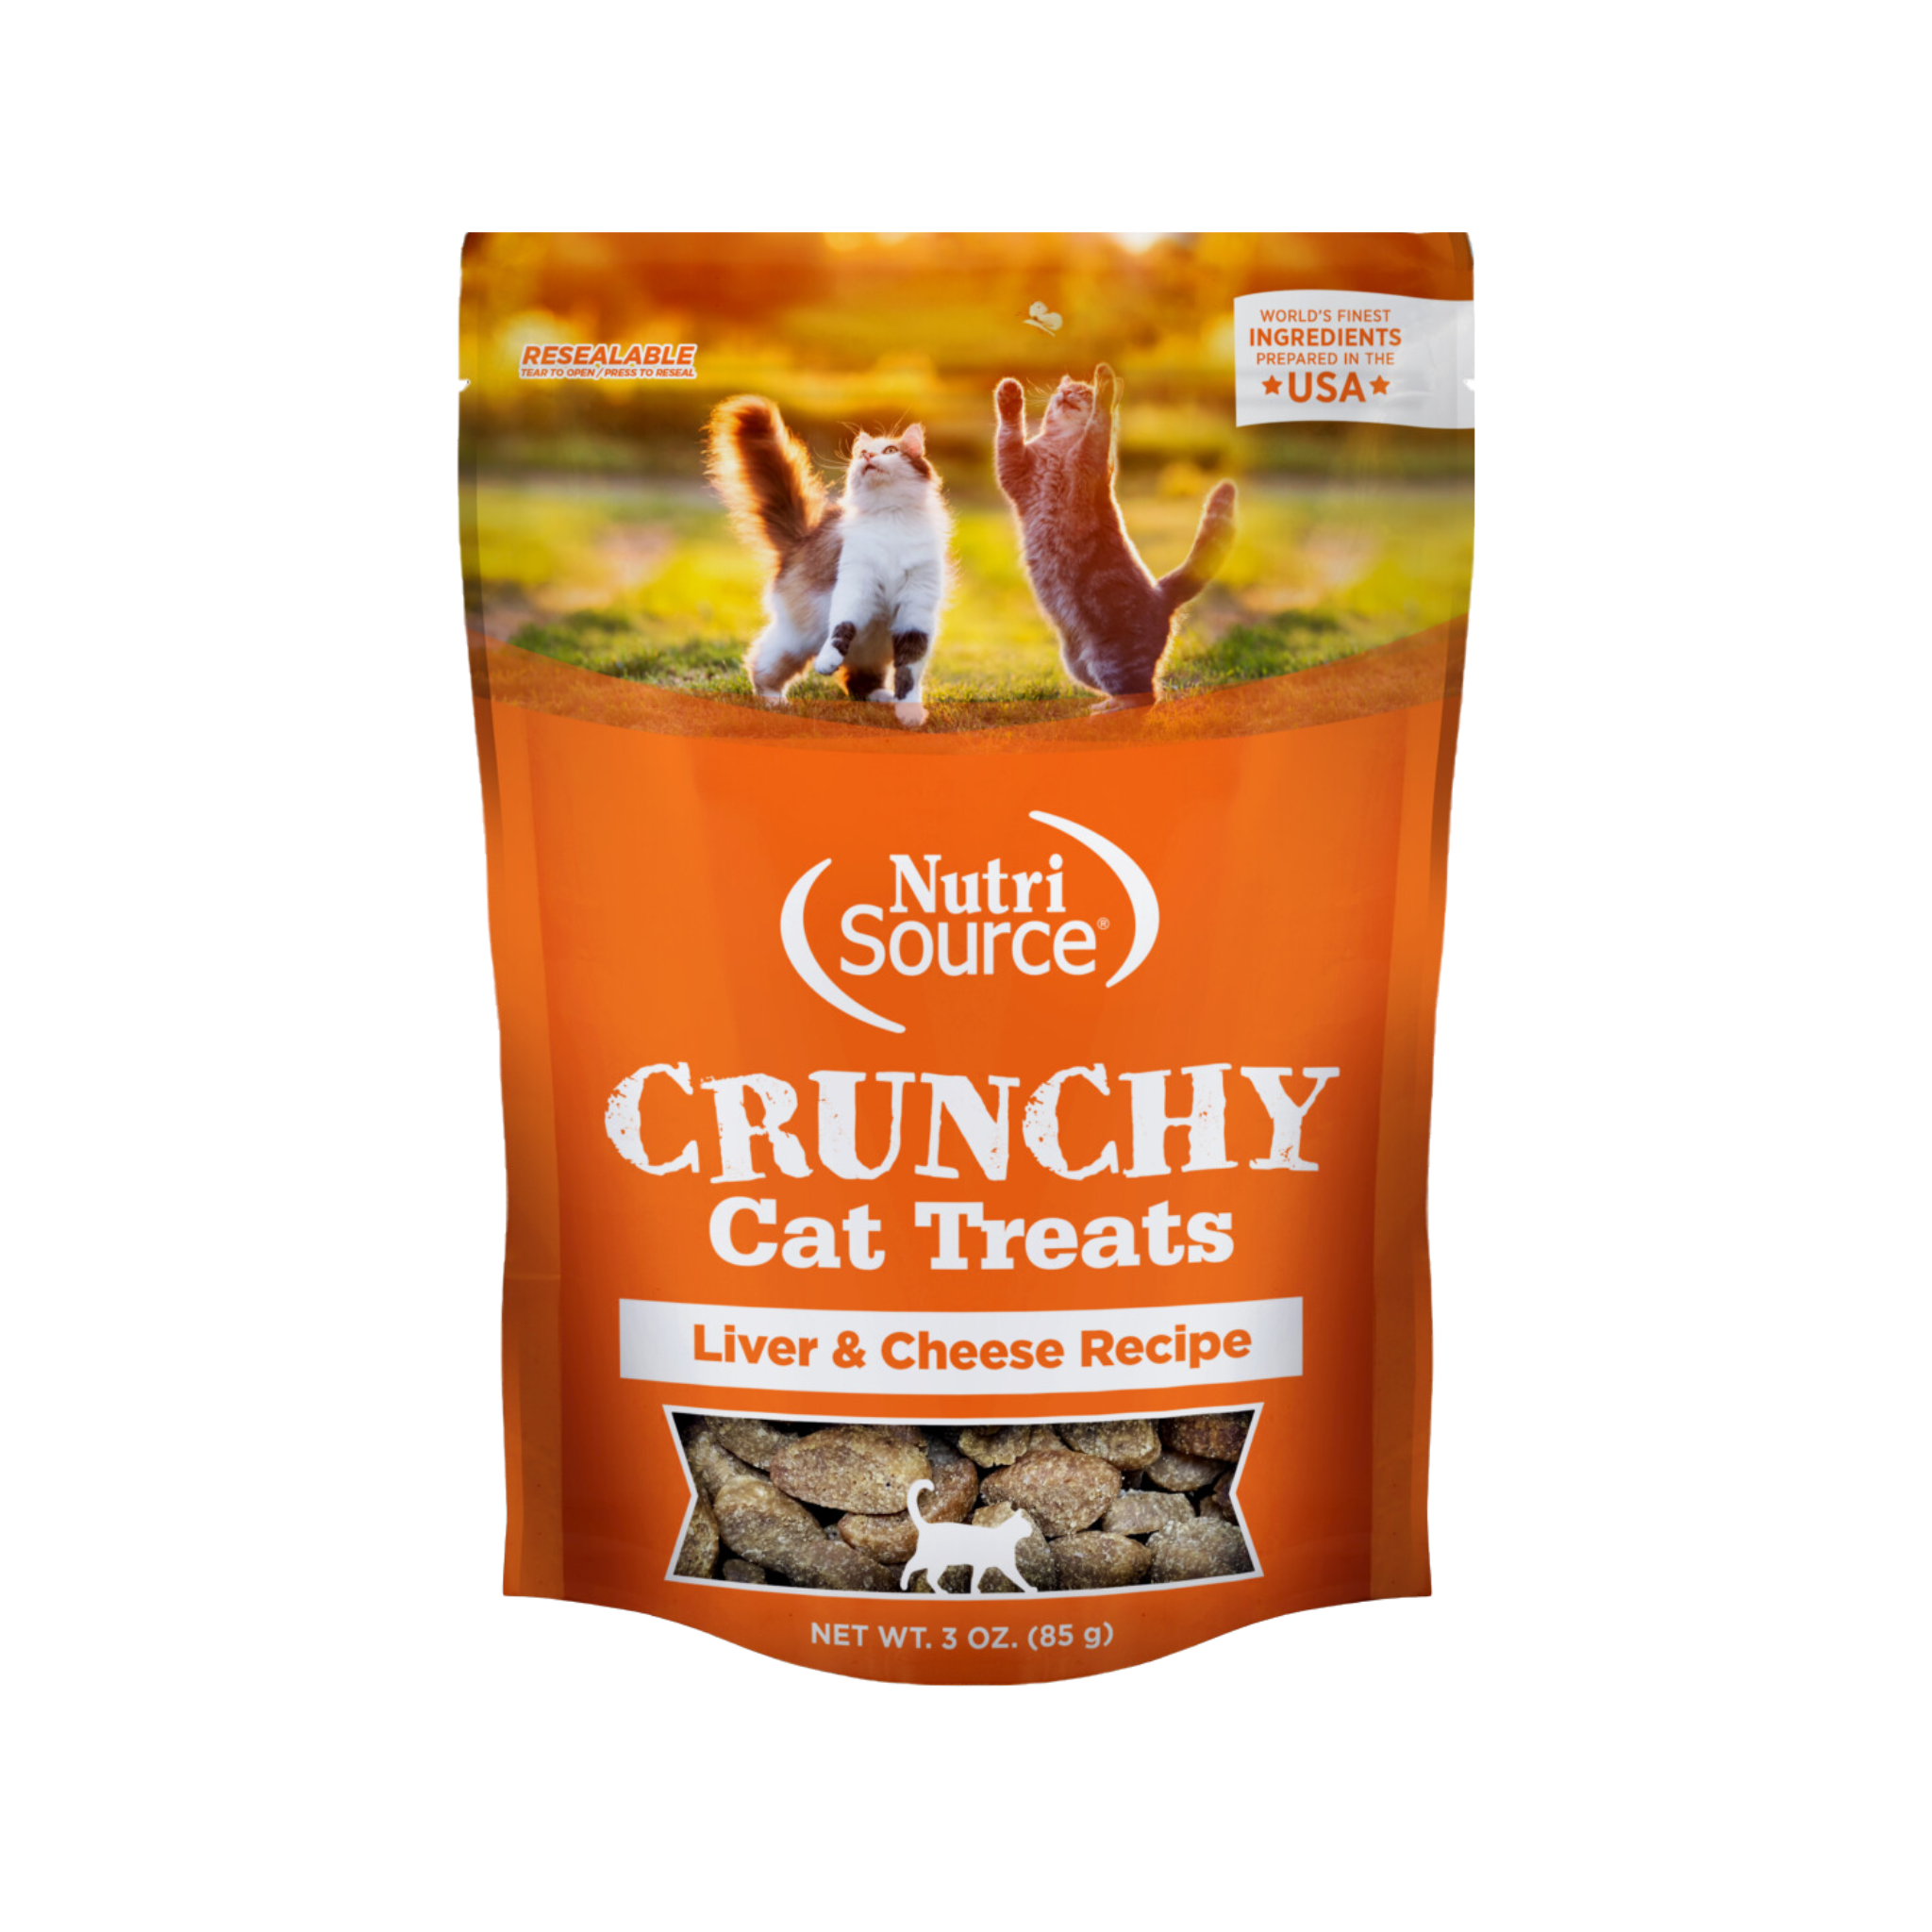 Nutrisource Crunchy Liver & Cheese Cat Treats